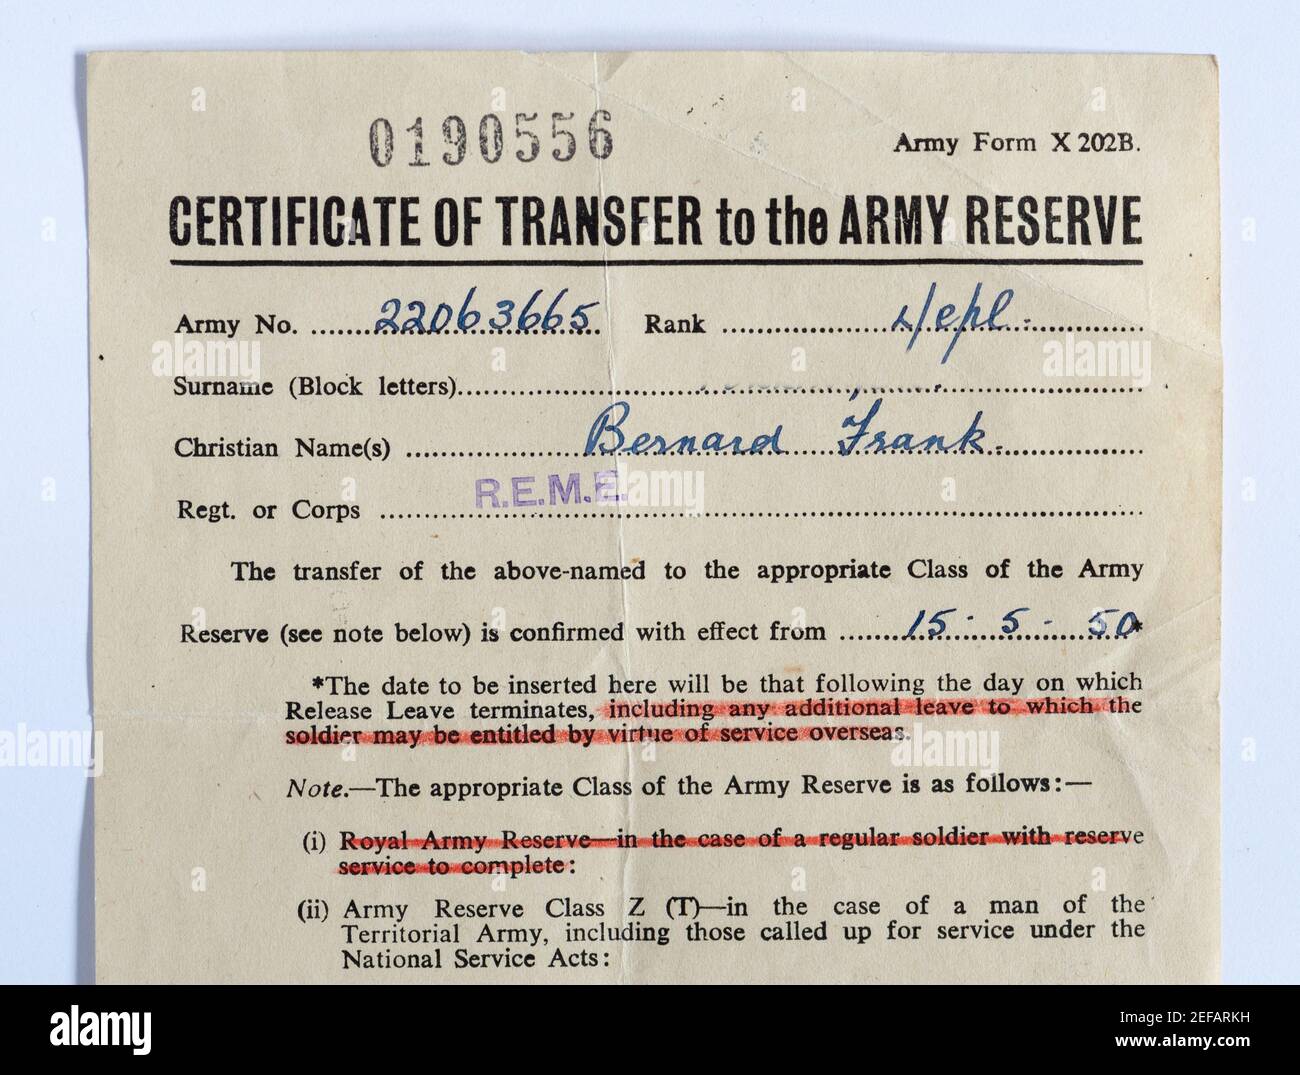 Certificate of transfer to the army reserve after finishing national service in 1950, historic military papers, England, UK Stock Photo